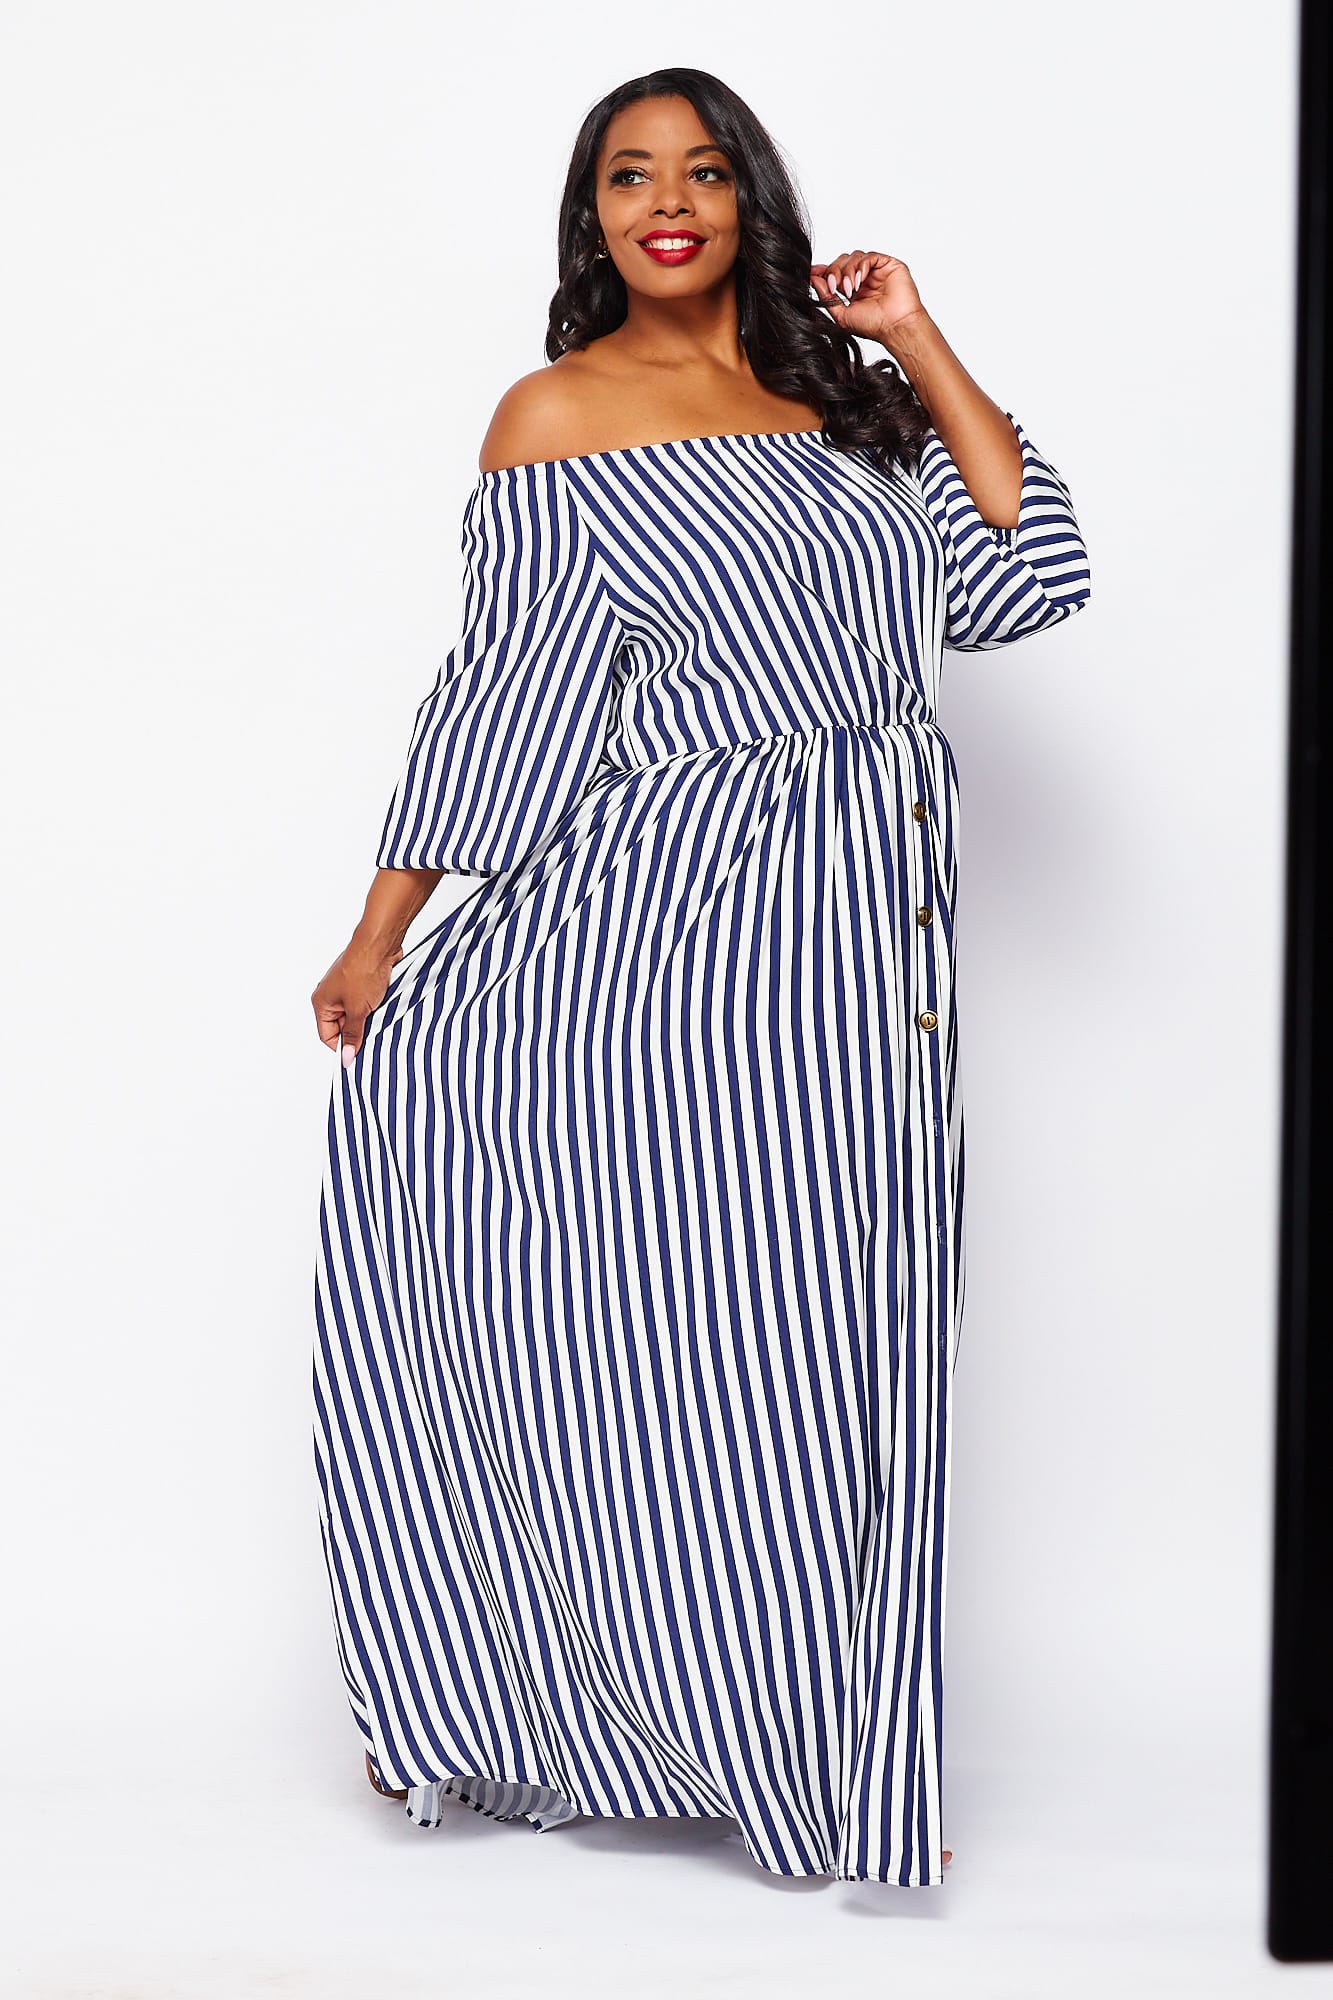 Never Blue Maxi Dress 💙1x-3x • • • Wearing 2x 💙Afterpay and Sezzle  Available at Checkout ▪️www.vintagekarmafashion.com